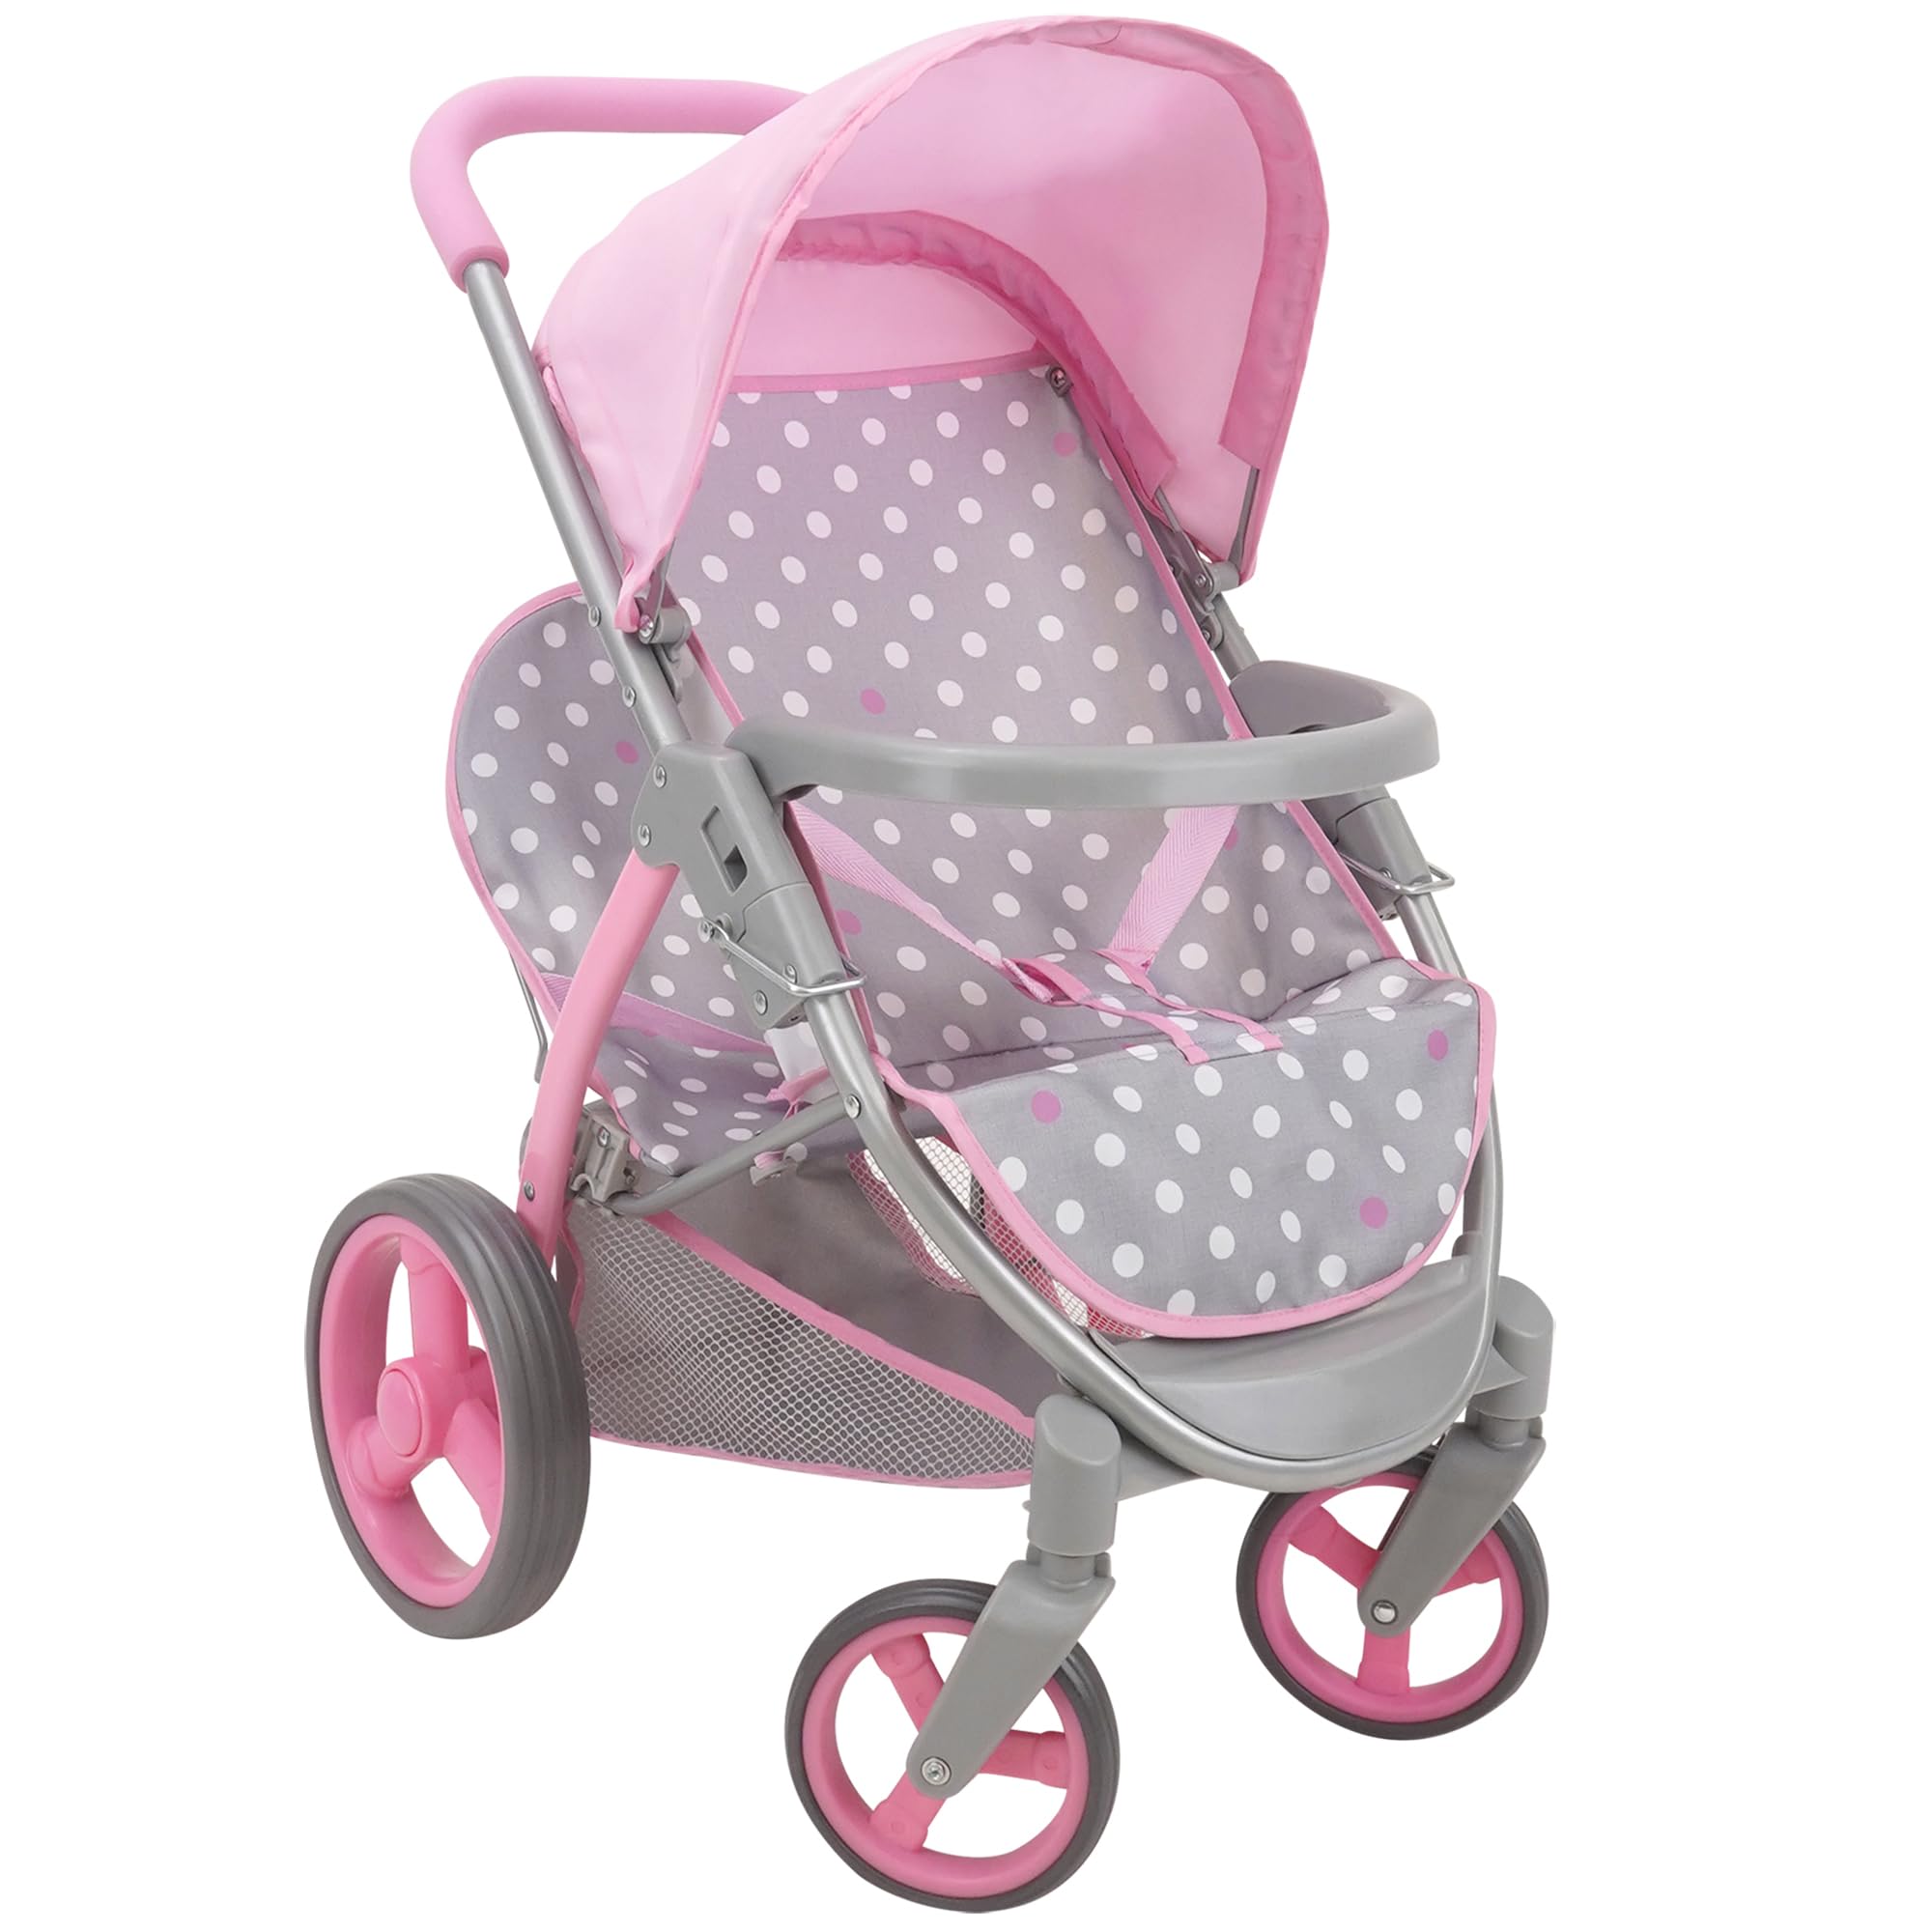 509 Crew: Cotton Candy Pink: Twin Tandem Doll Stroller - Pink, Grey, Polka Dot - Dolls Up to 18